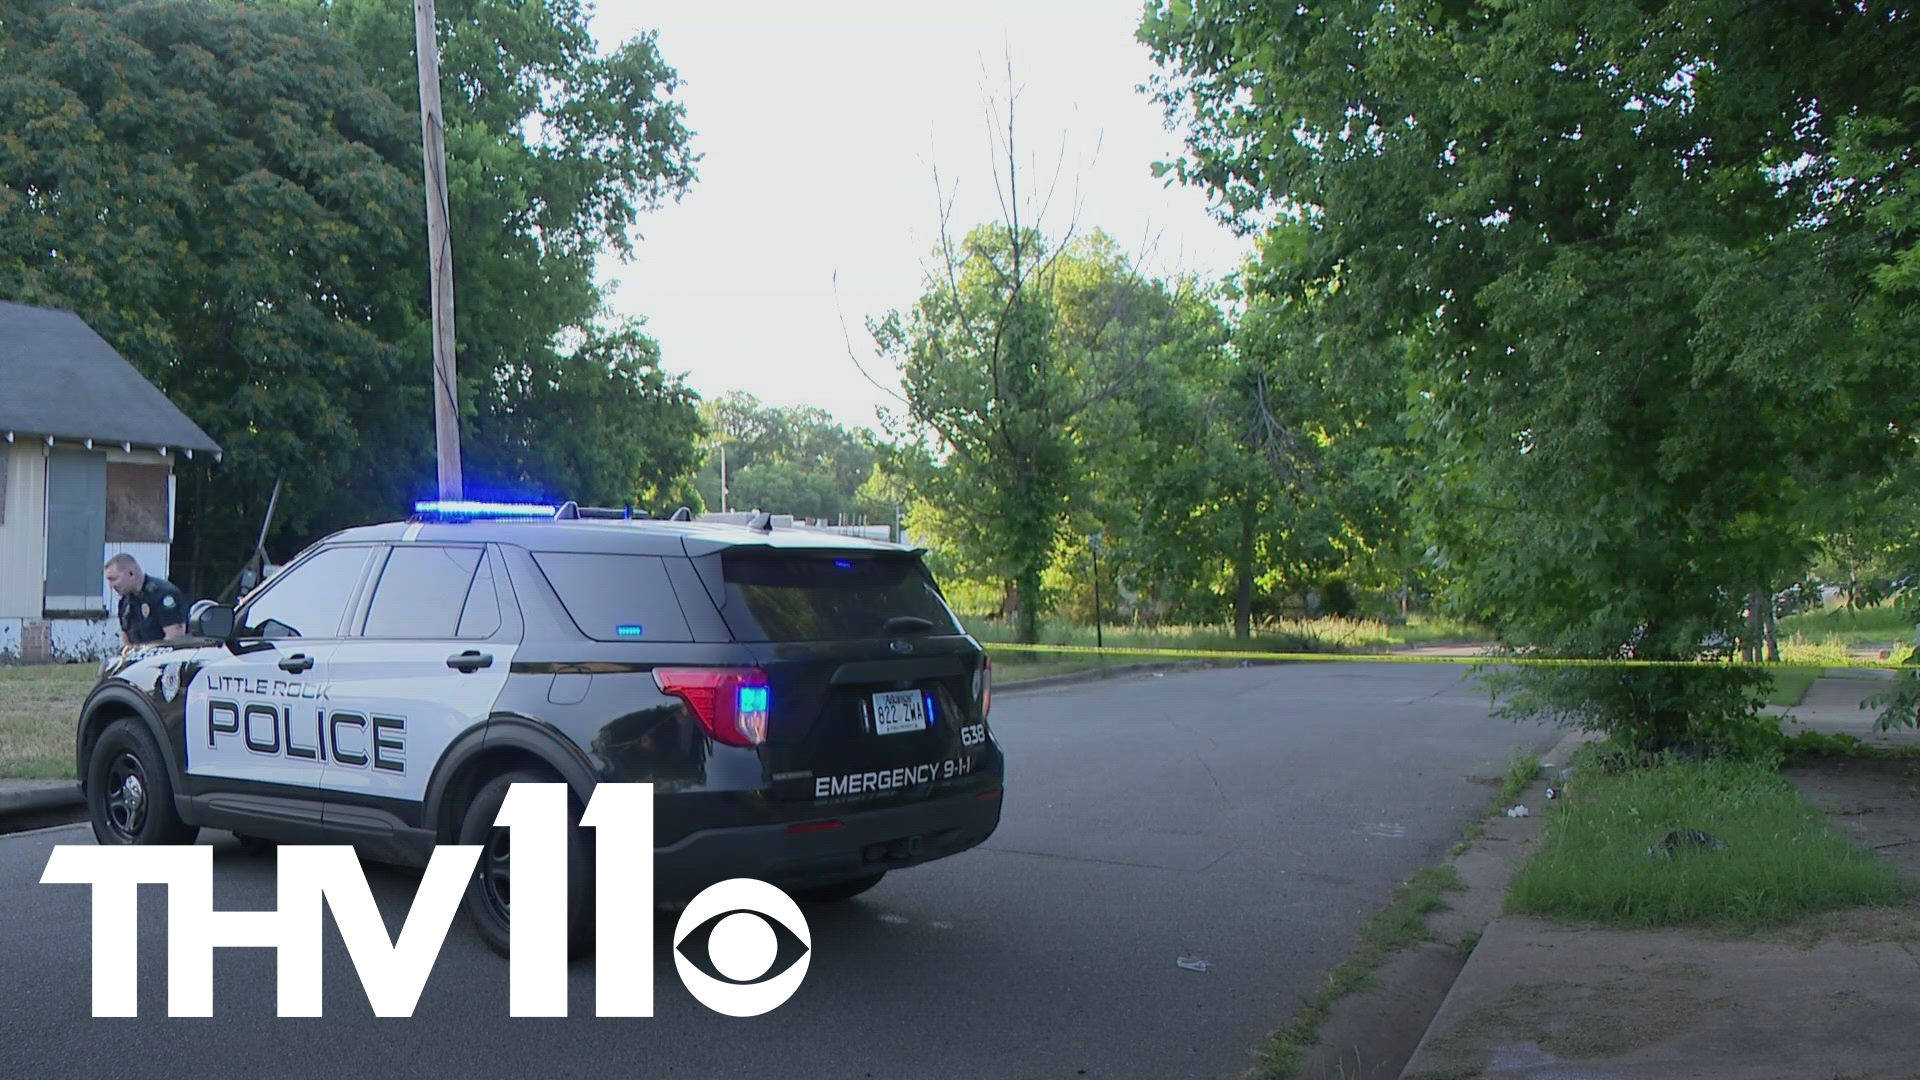 The Little Rock Police Department is investigating a shooting incident that left one man dead on Monday, May 20.